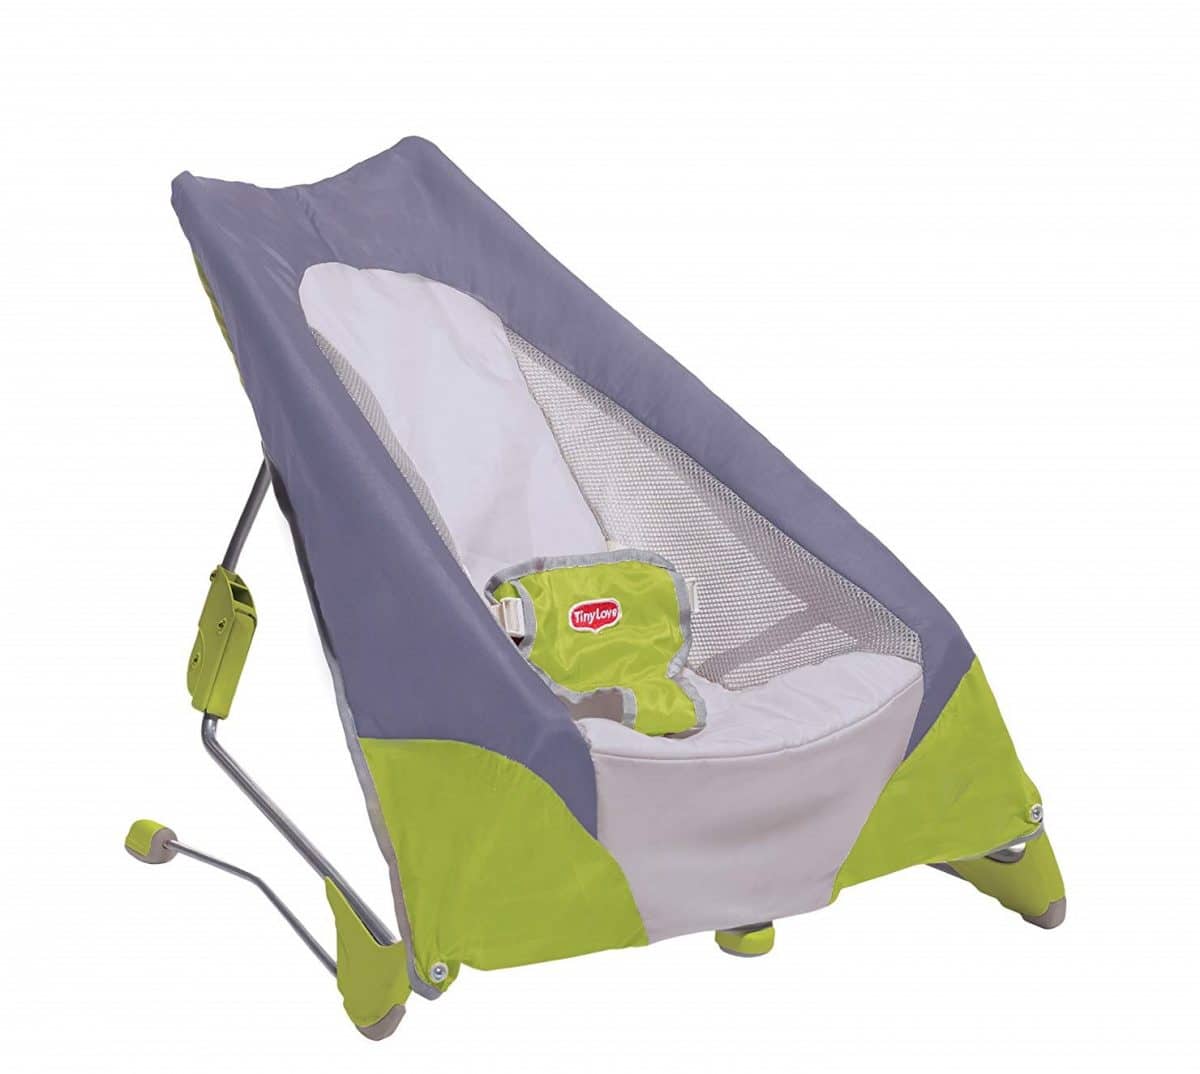 The 10 Best Baby Bouncer Seats to Buy 2020 - LittleOneMag